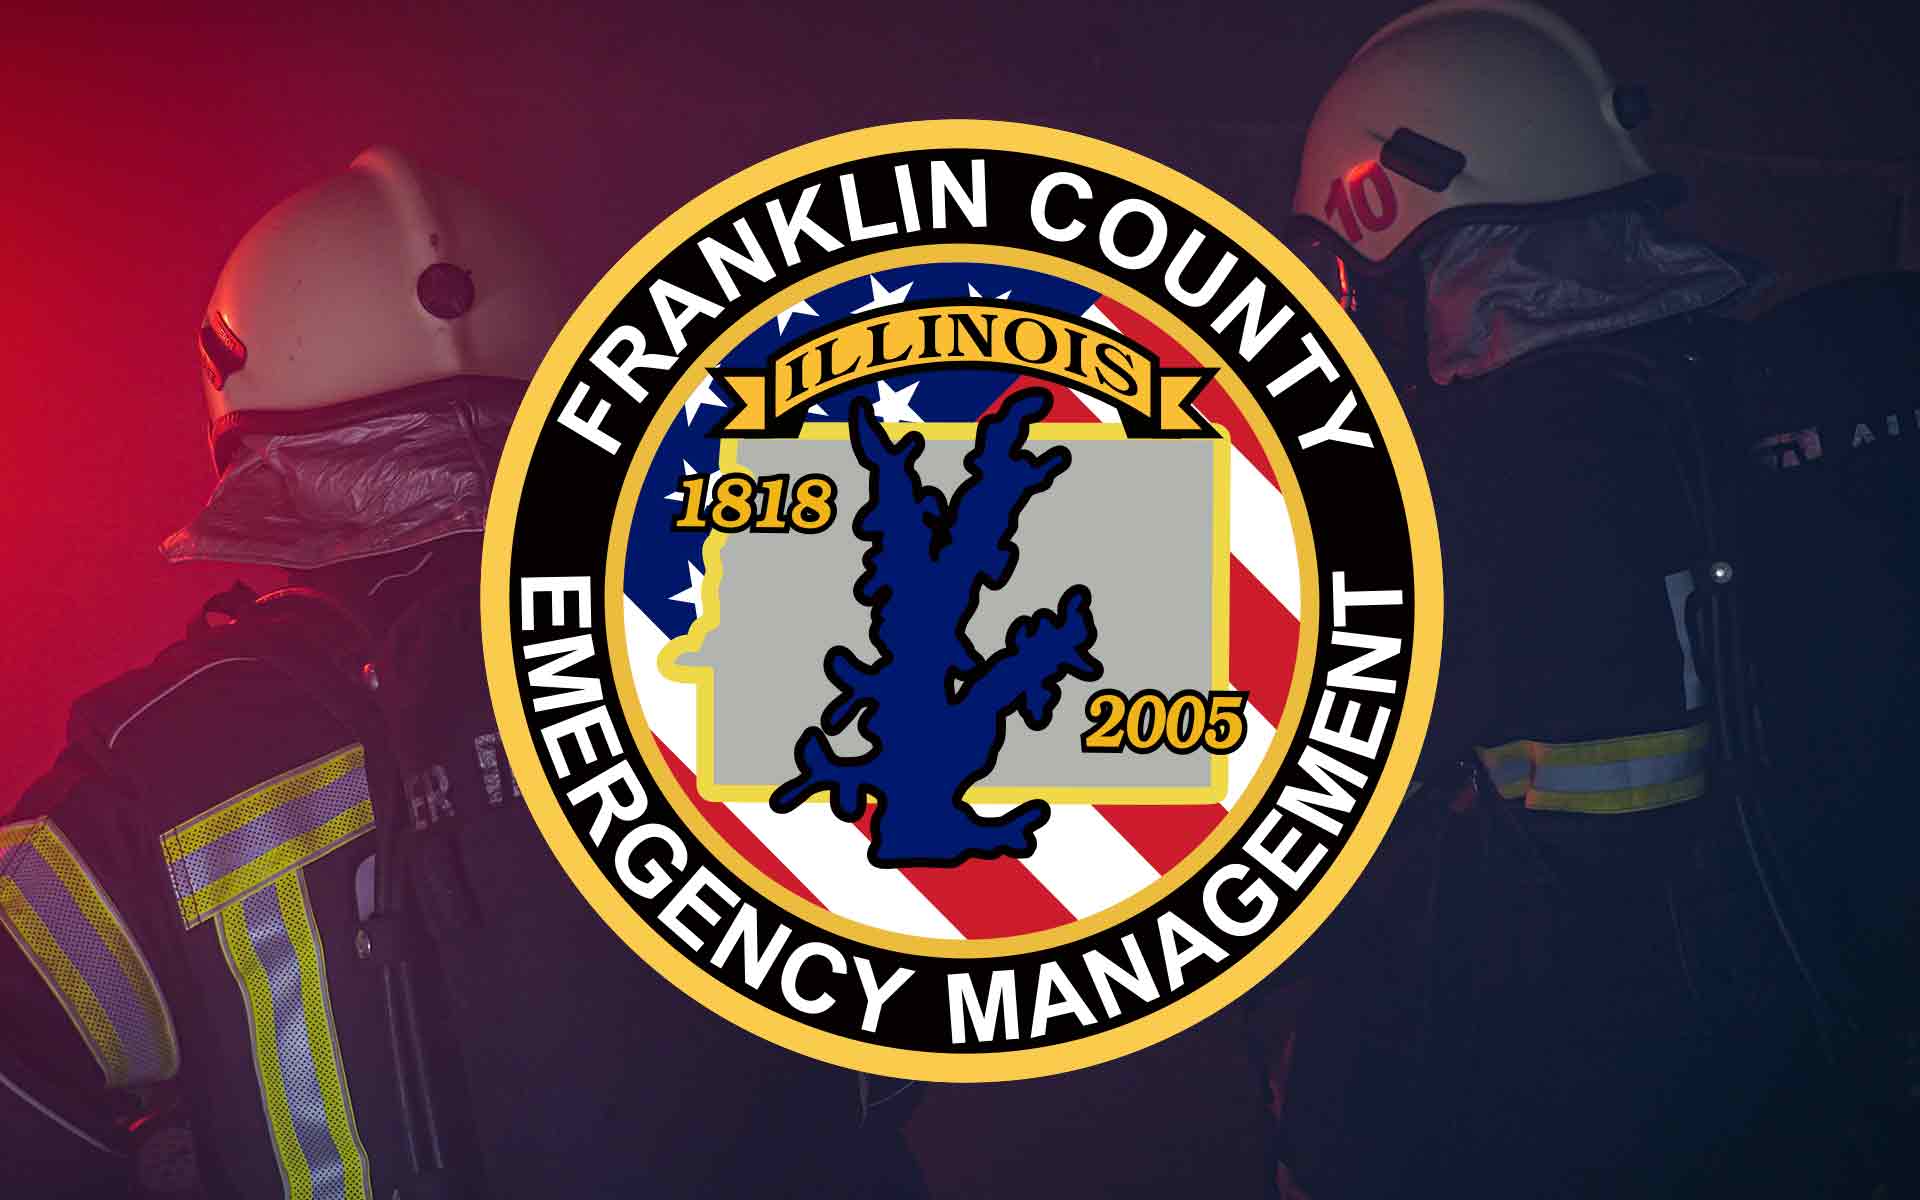 Franklin County Emergency Management Logo over two firefighters